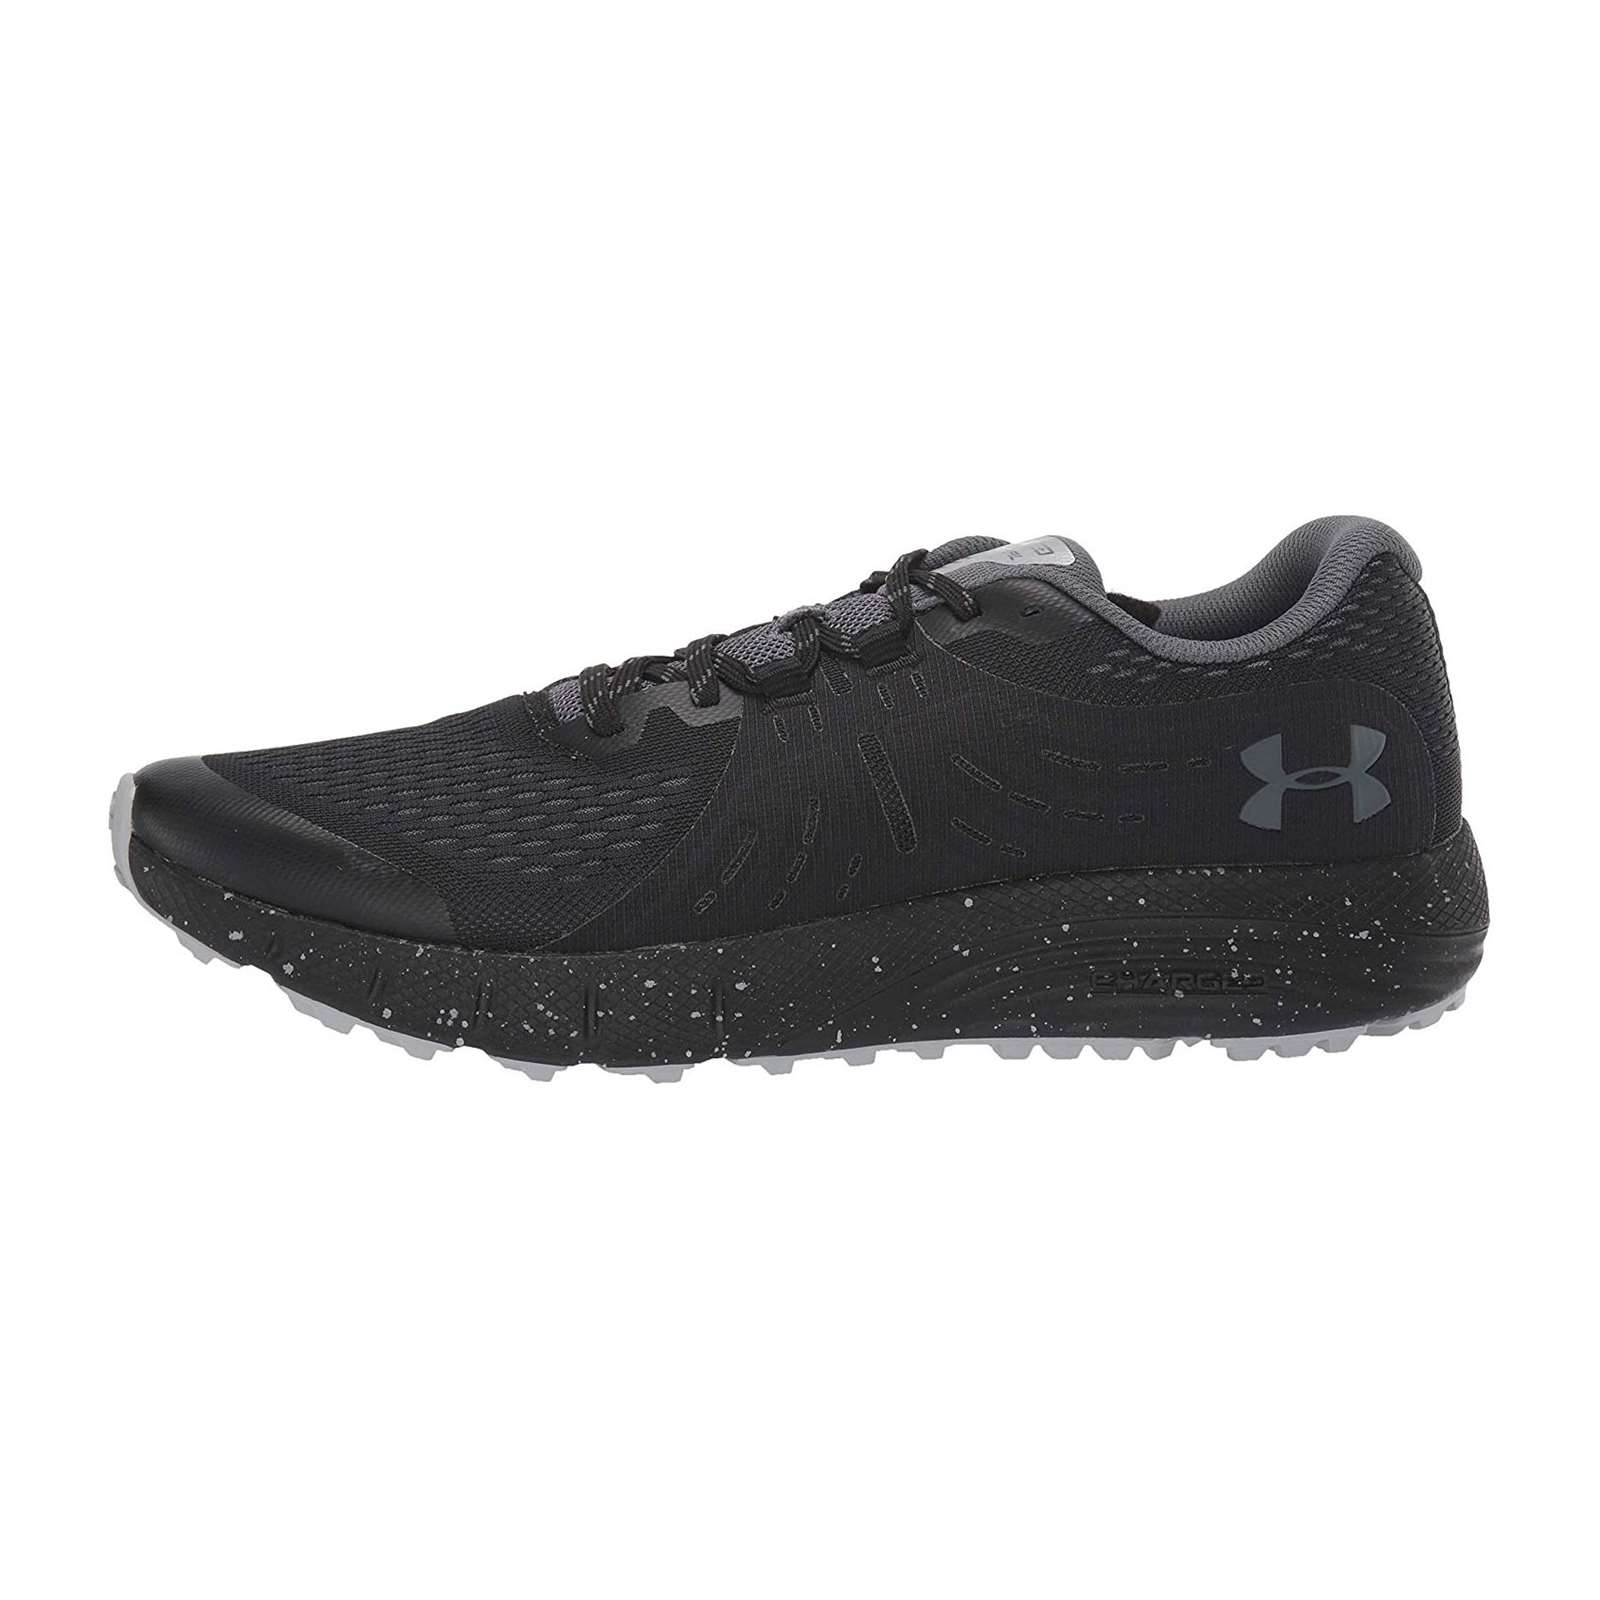 Men's Under Armour Charged Bandit Trail Running Shoe - image 3 of 7